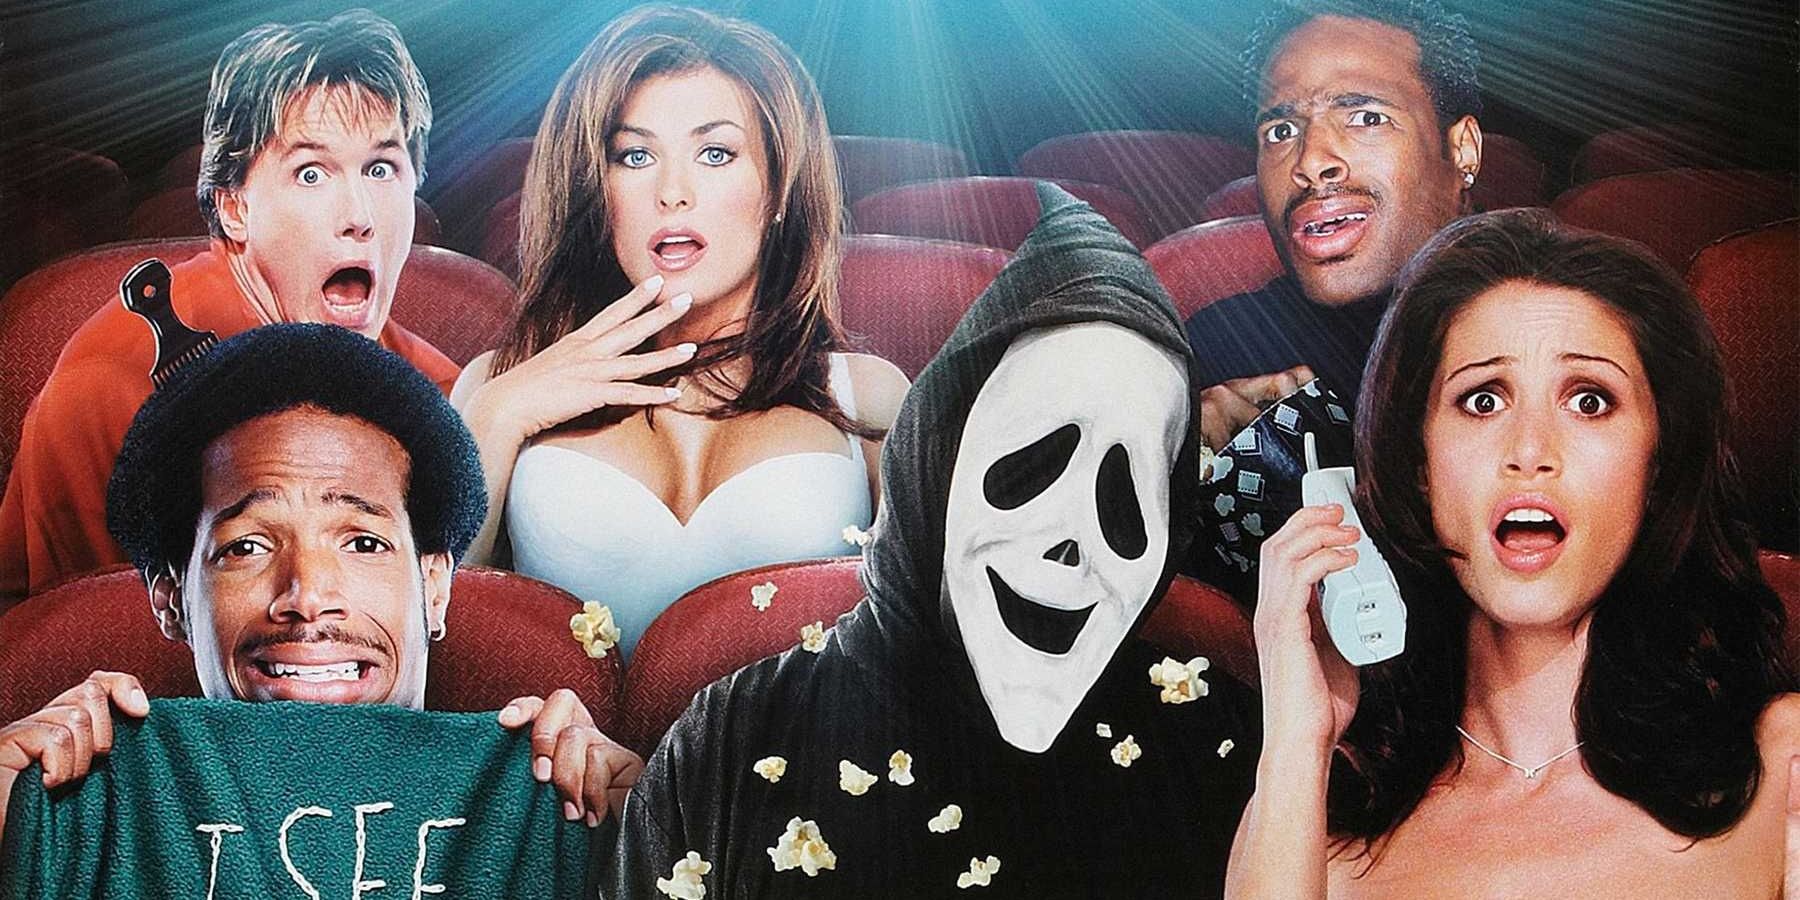 10 Comedy Movies From The 2000s That Critics Hated (But Audiences Loved)